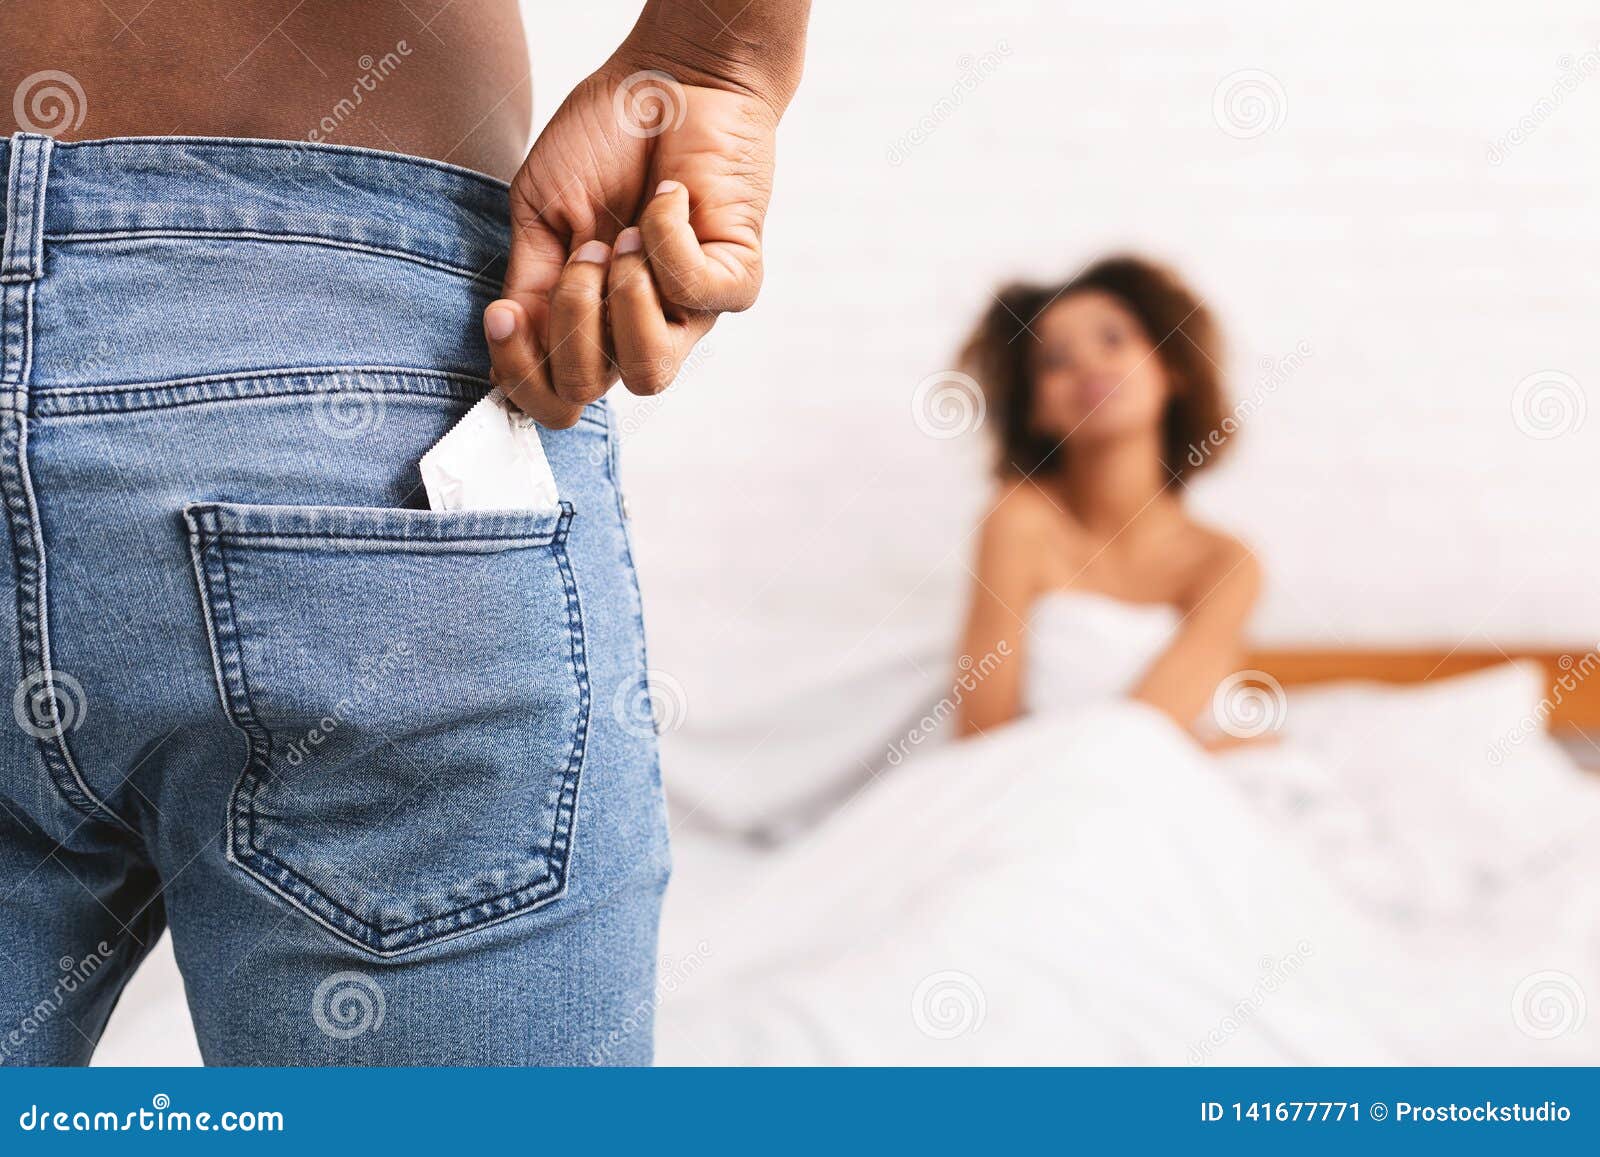 Man Taking Condom from Jeans, Woman Waiting in Bed Stock Image image pic